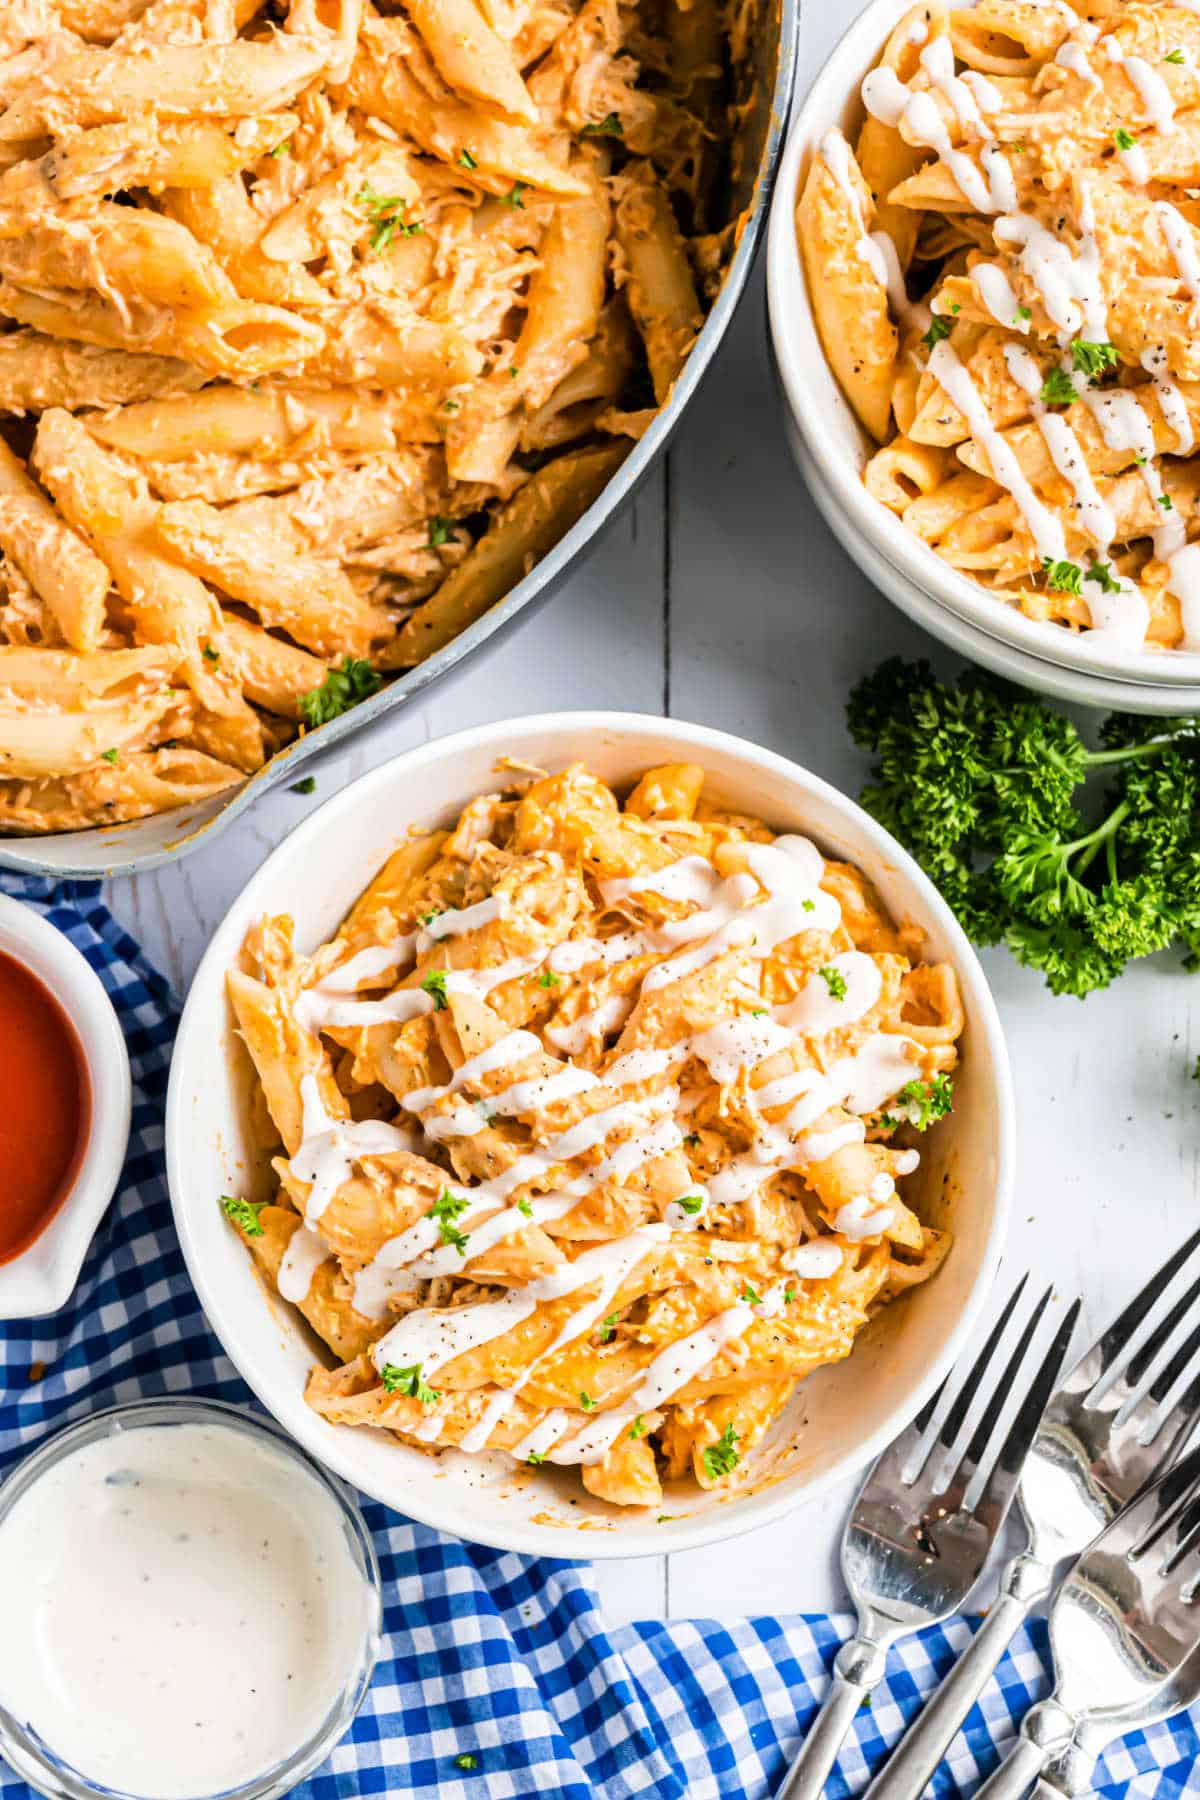 Buffalo chicken pasta served in a bowl drizzled with blue cheese dressing.